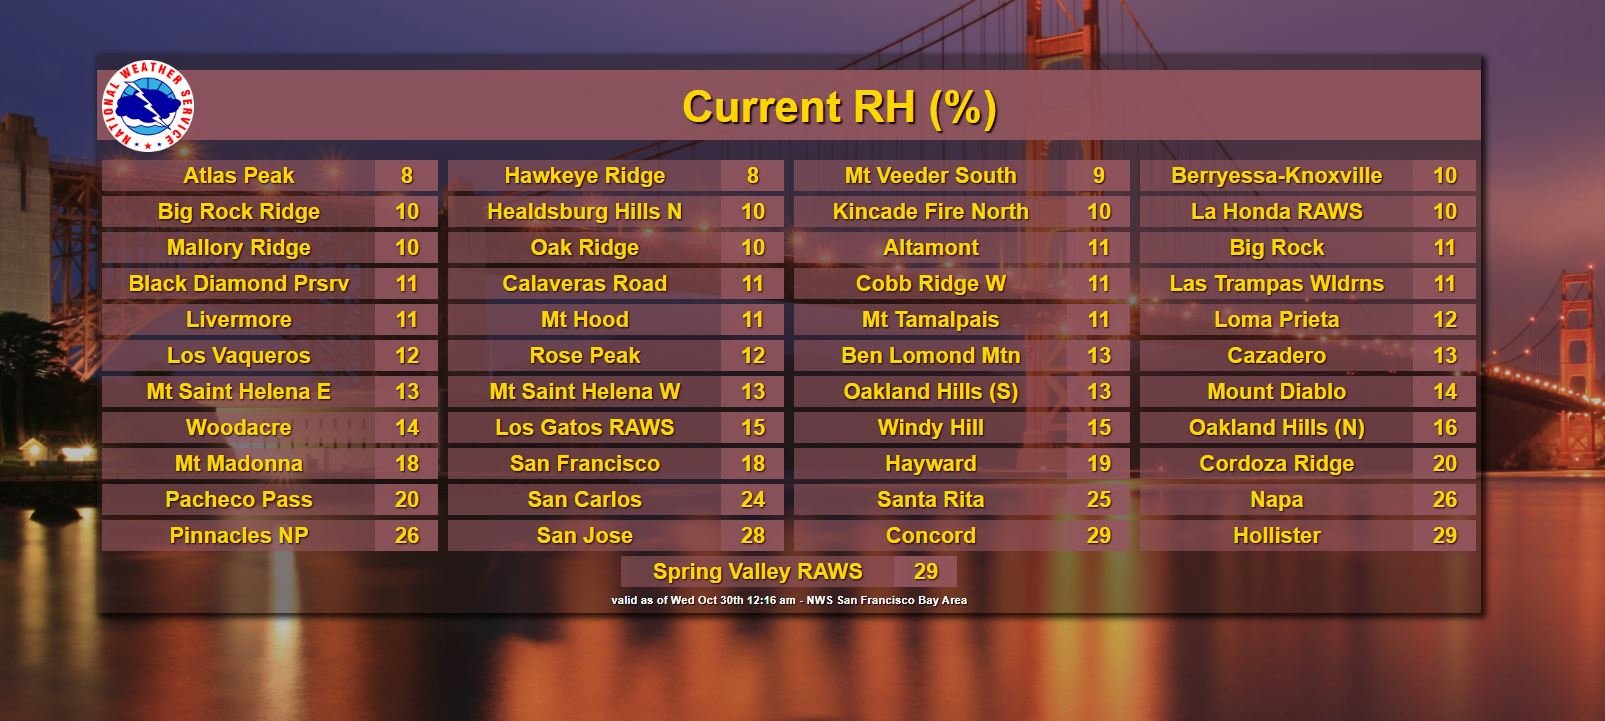 Current humidity readings